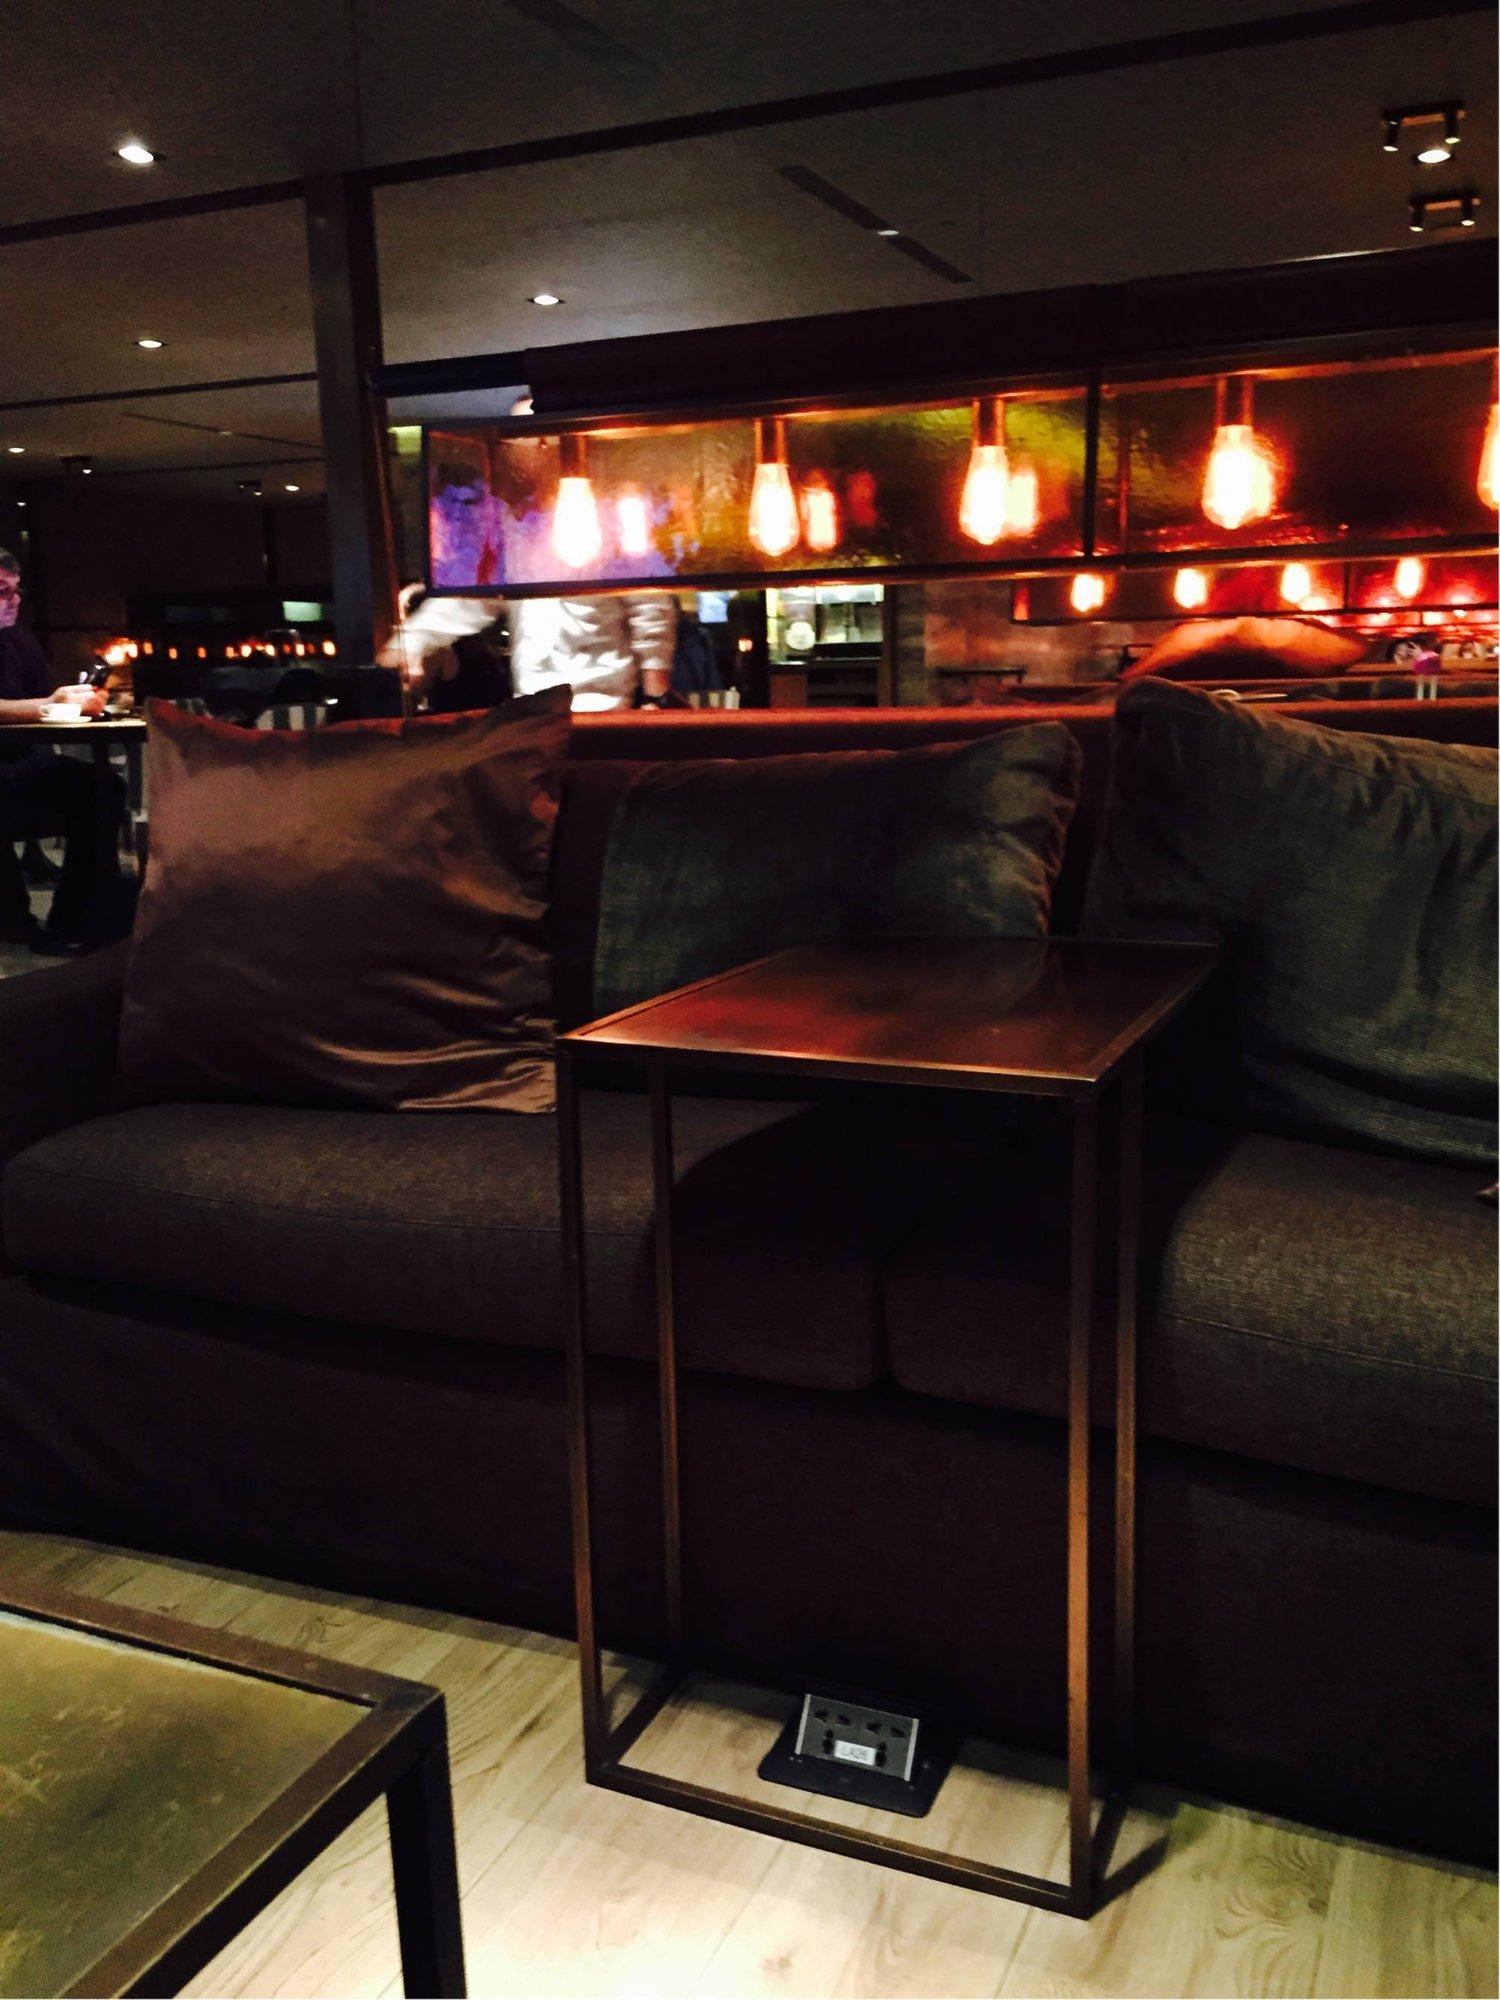 China Airlines Lounge (V1) image 16 of 44